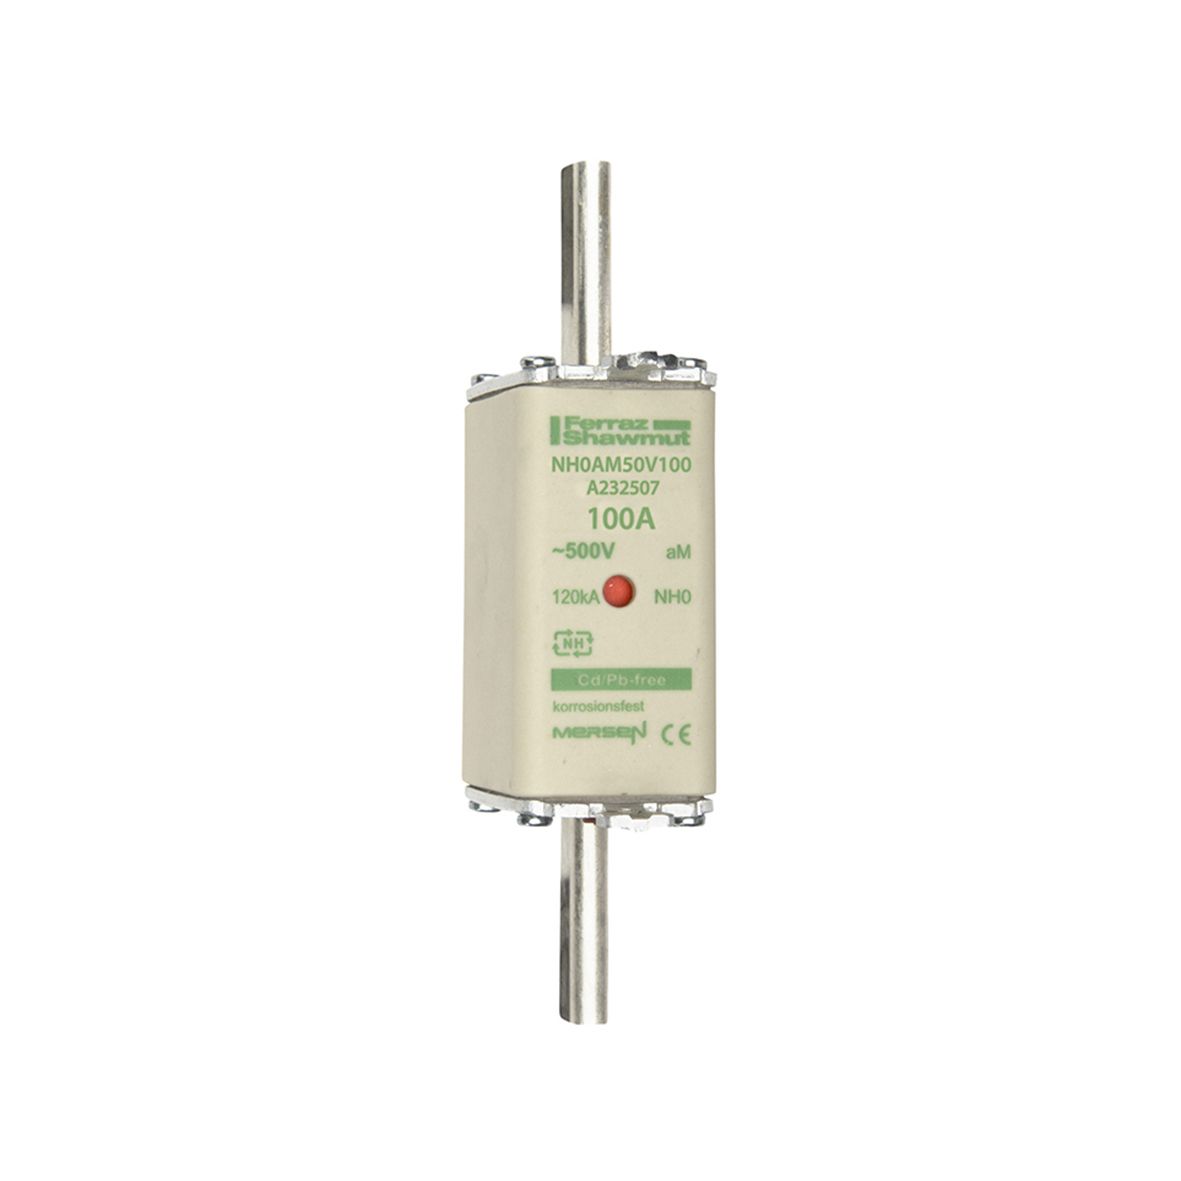 A232507 - NH fuse-link aM, 500VAC, size 0, 100A double indicator/live tags